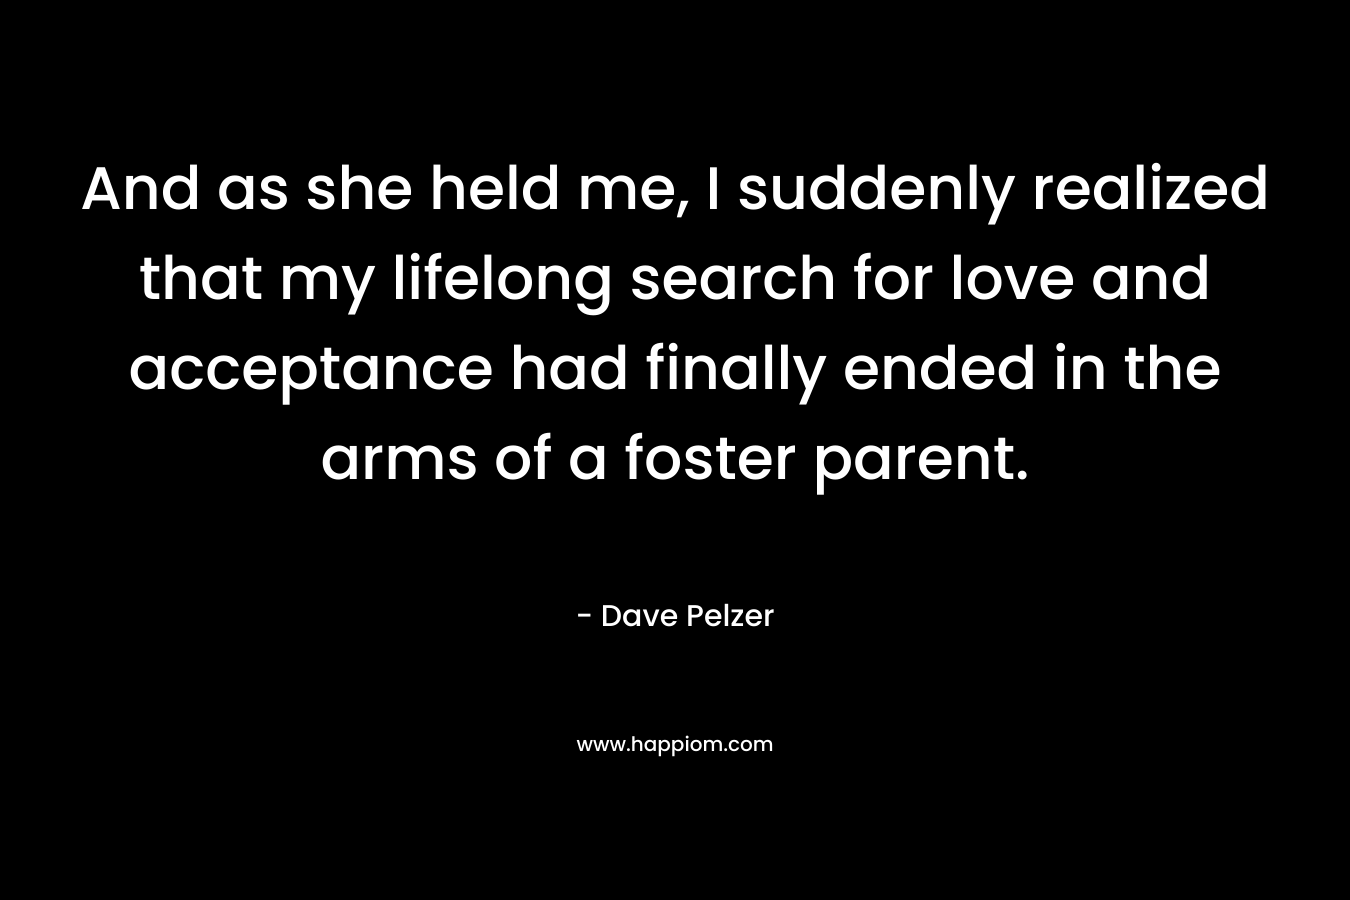 And as she held me, I suddenly realized that my lifelong search for love and acceptance had finally ended in the arms of a foster parent.